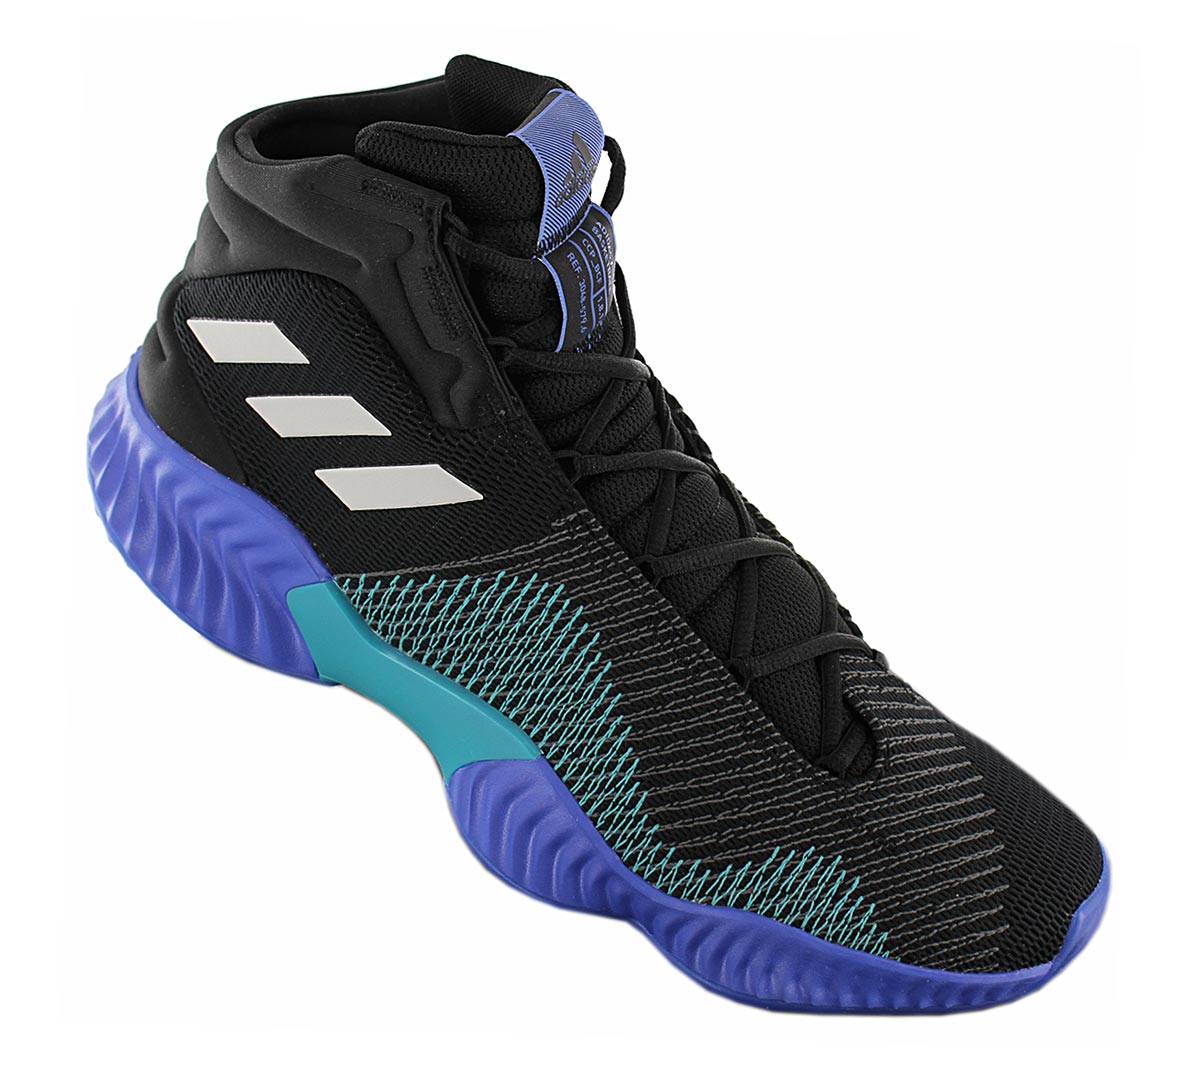 NEW adidas Pro Bounce 2018 AH2657 Men´s Shoes Trainers Sneakers SALE | eBay